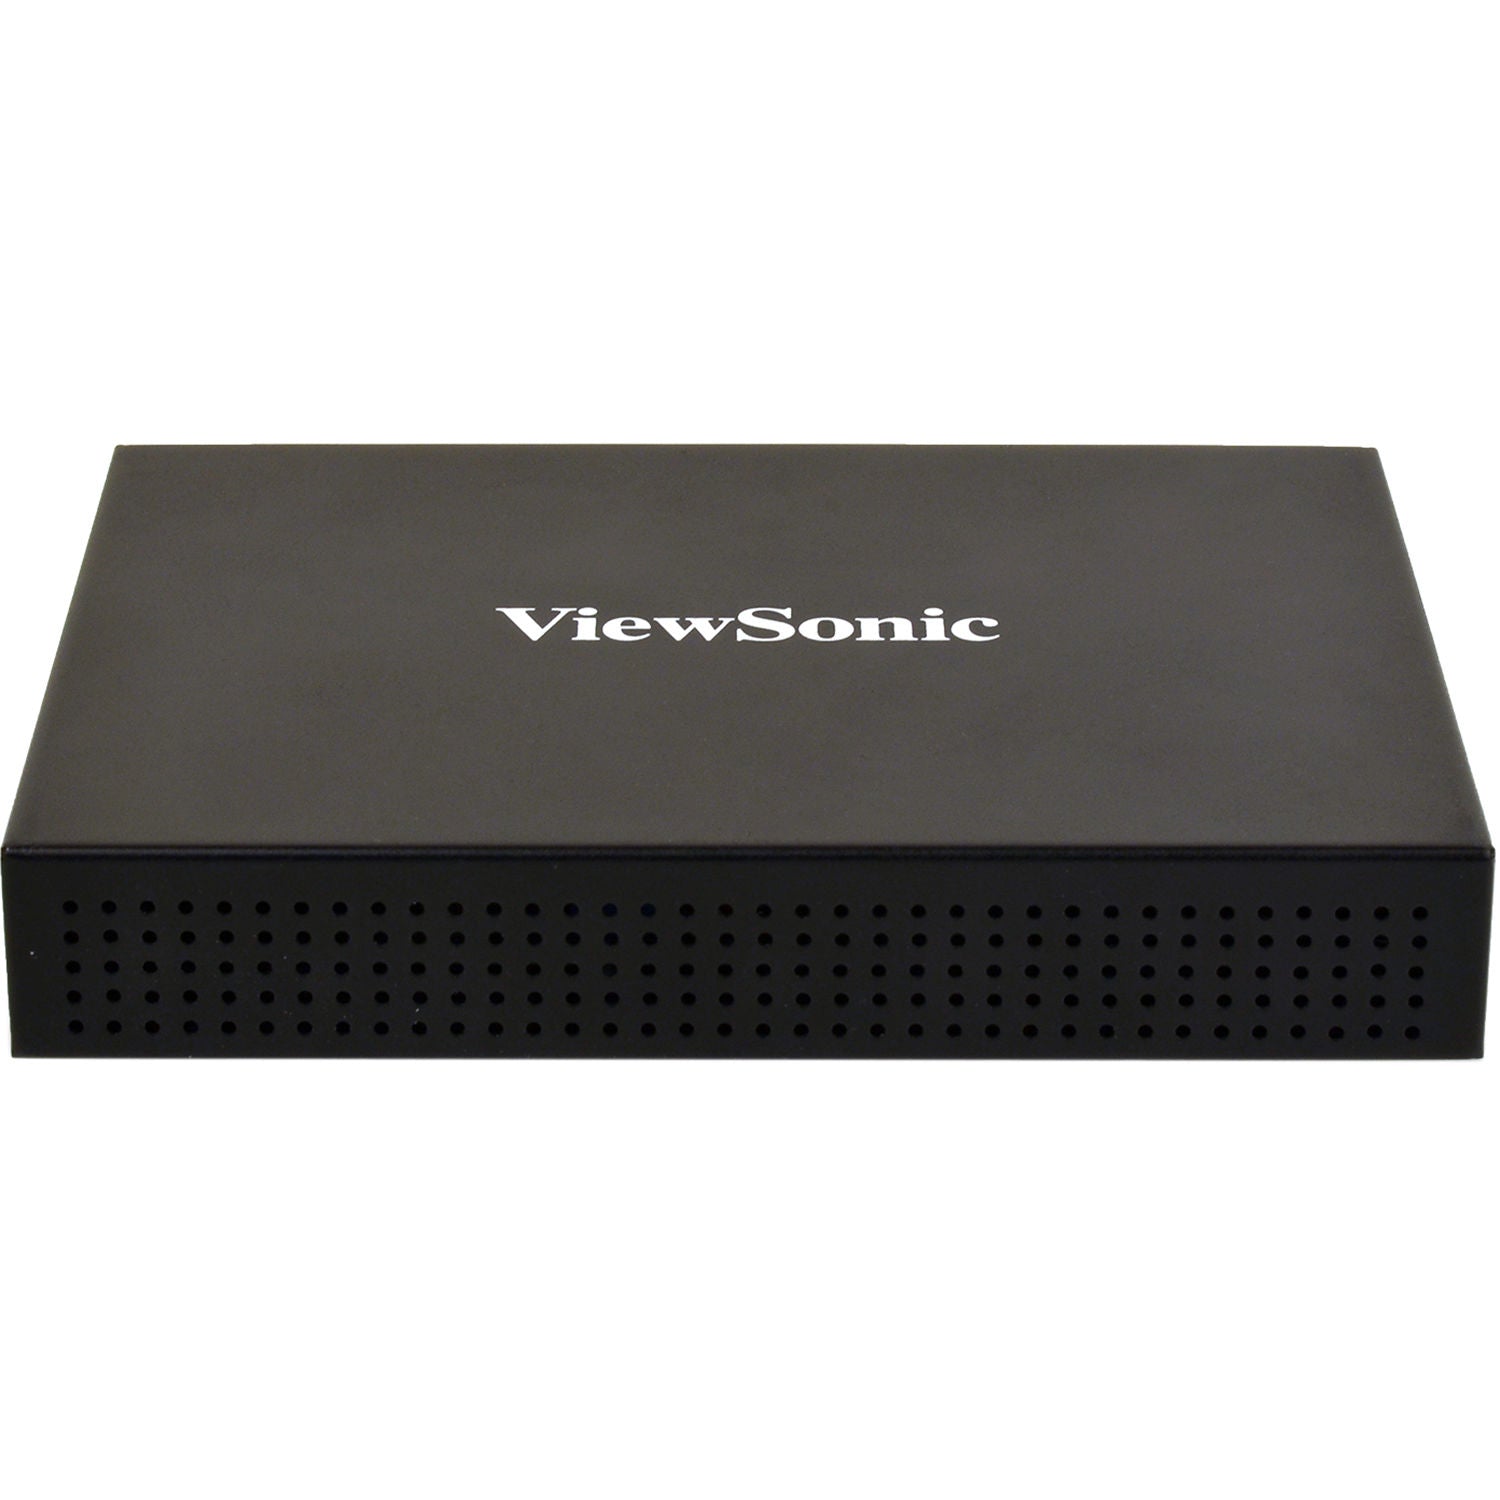 ViewSonic SC-A25X-R Network Media Player with with Displayit Xpress Software for Digital Signage - Certified Refurbished